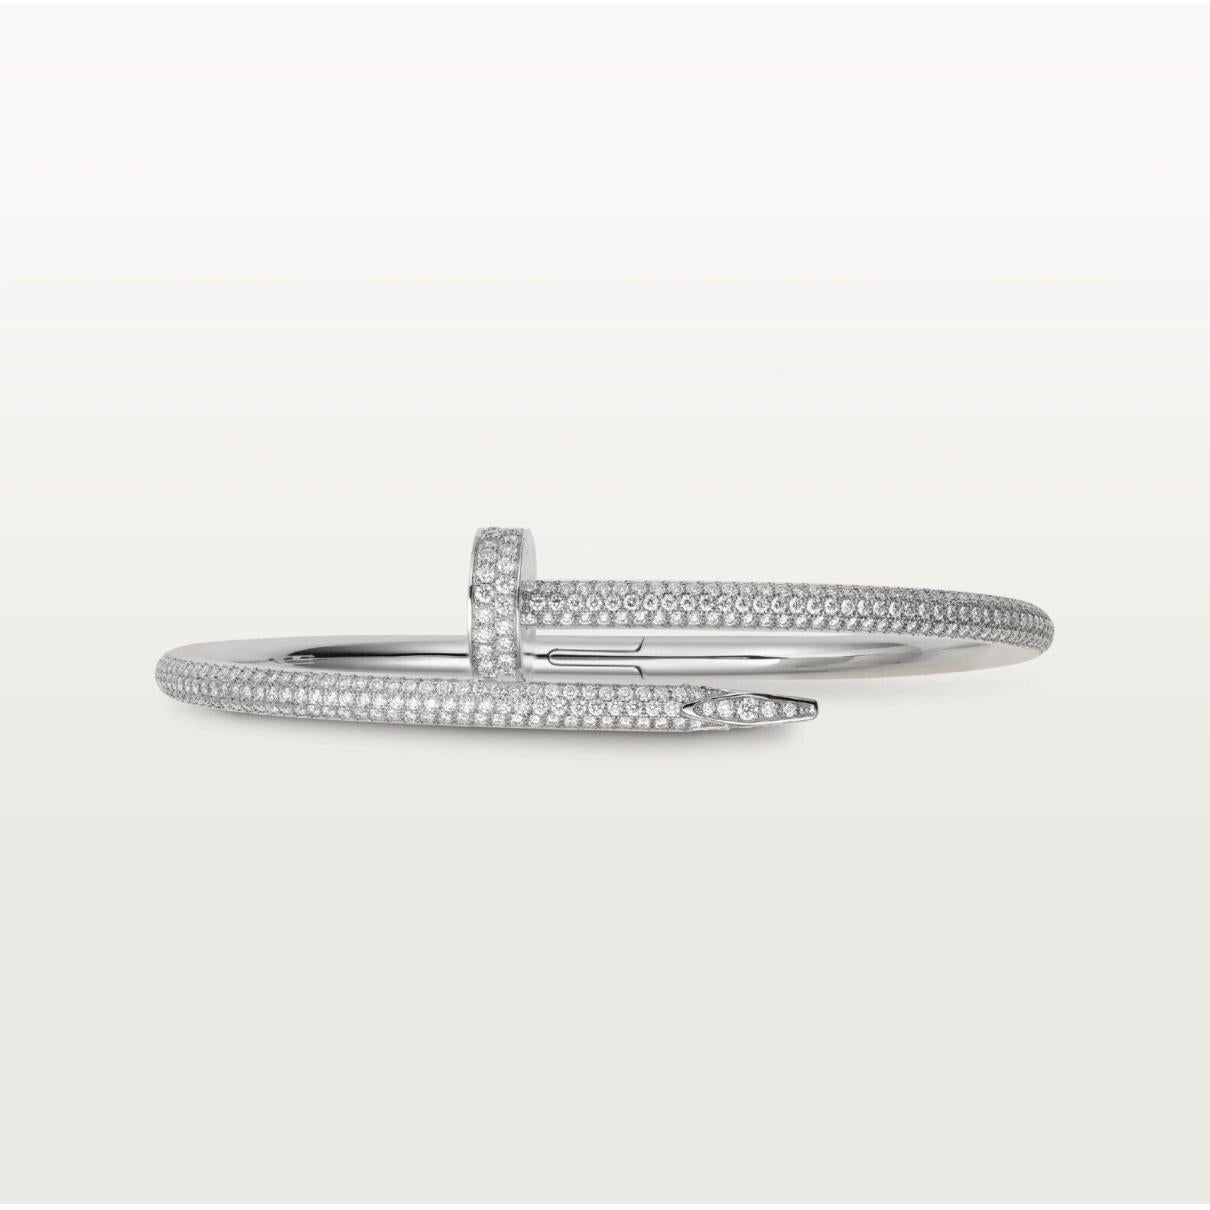 Juste un Clou bracelet, classic, white gold 750/1000, set with 374 brilliant-cut diamonds totalling 2.26 carats. Width: 3.5 mm (for size 17).

At PRADERA we know that purchasing a pre-owned luxury jewel online can be daunting. We aim to make your